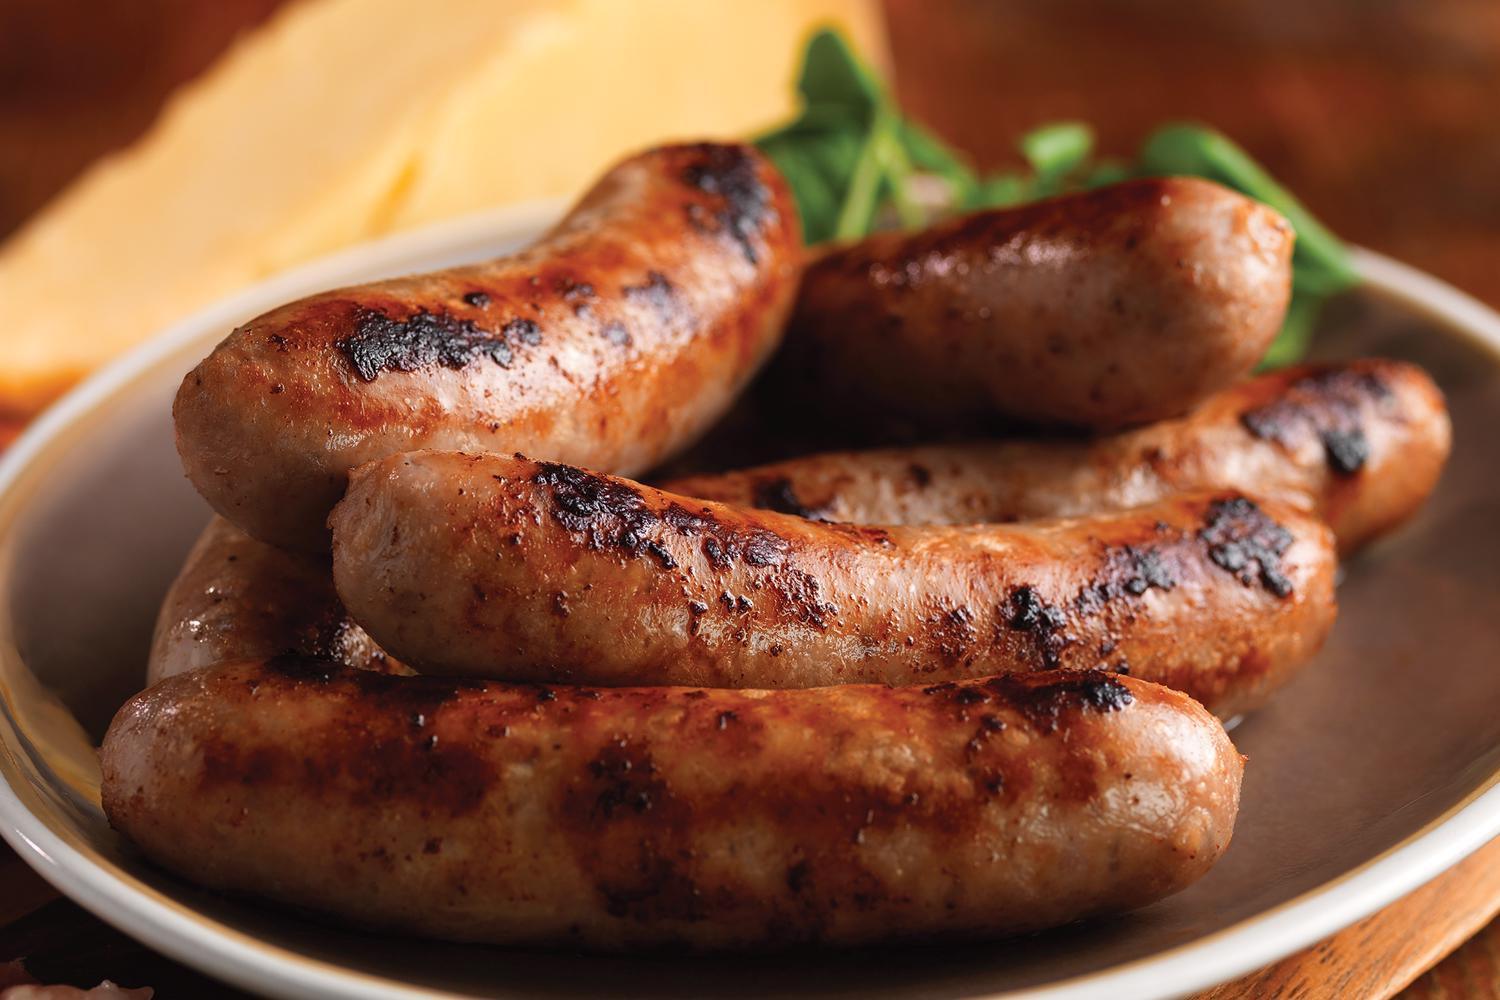 Lincolnshire Sausages - 400g | Order Now | DukesHill